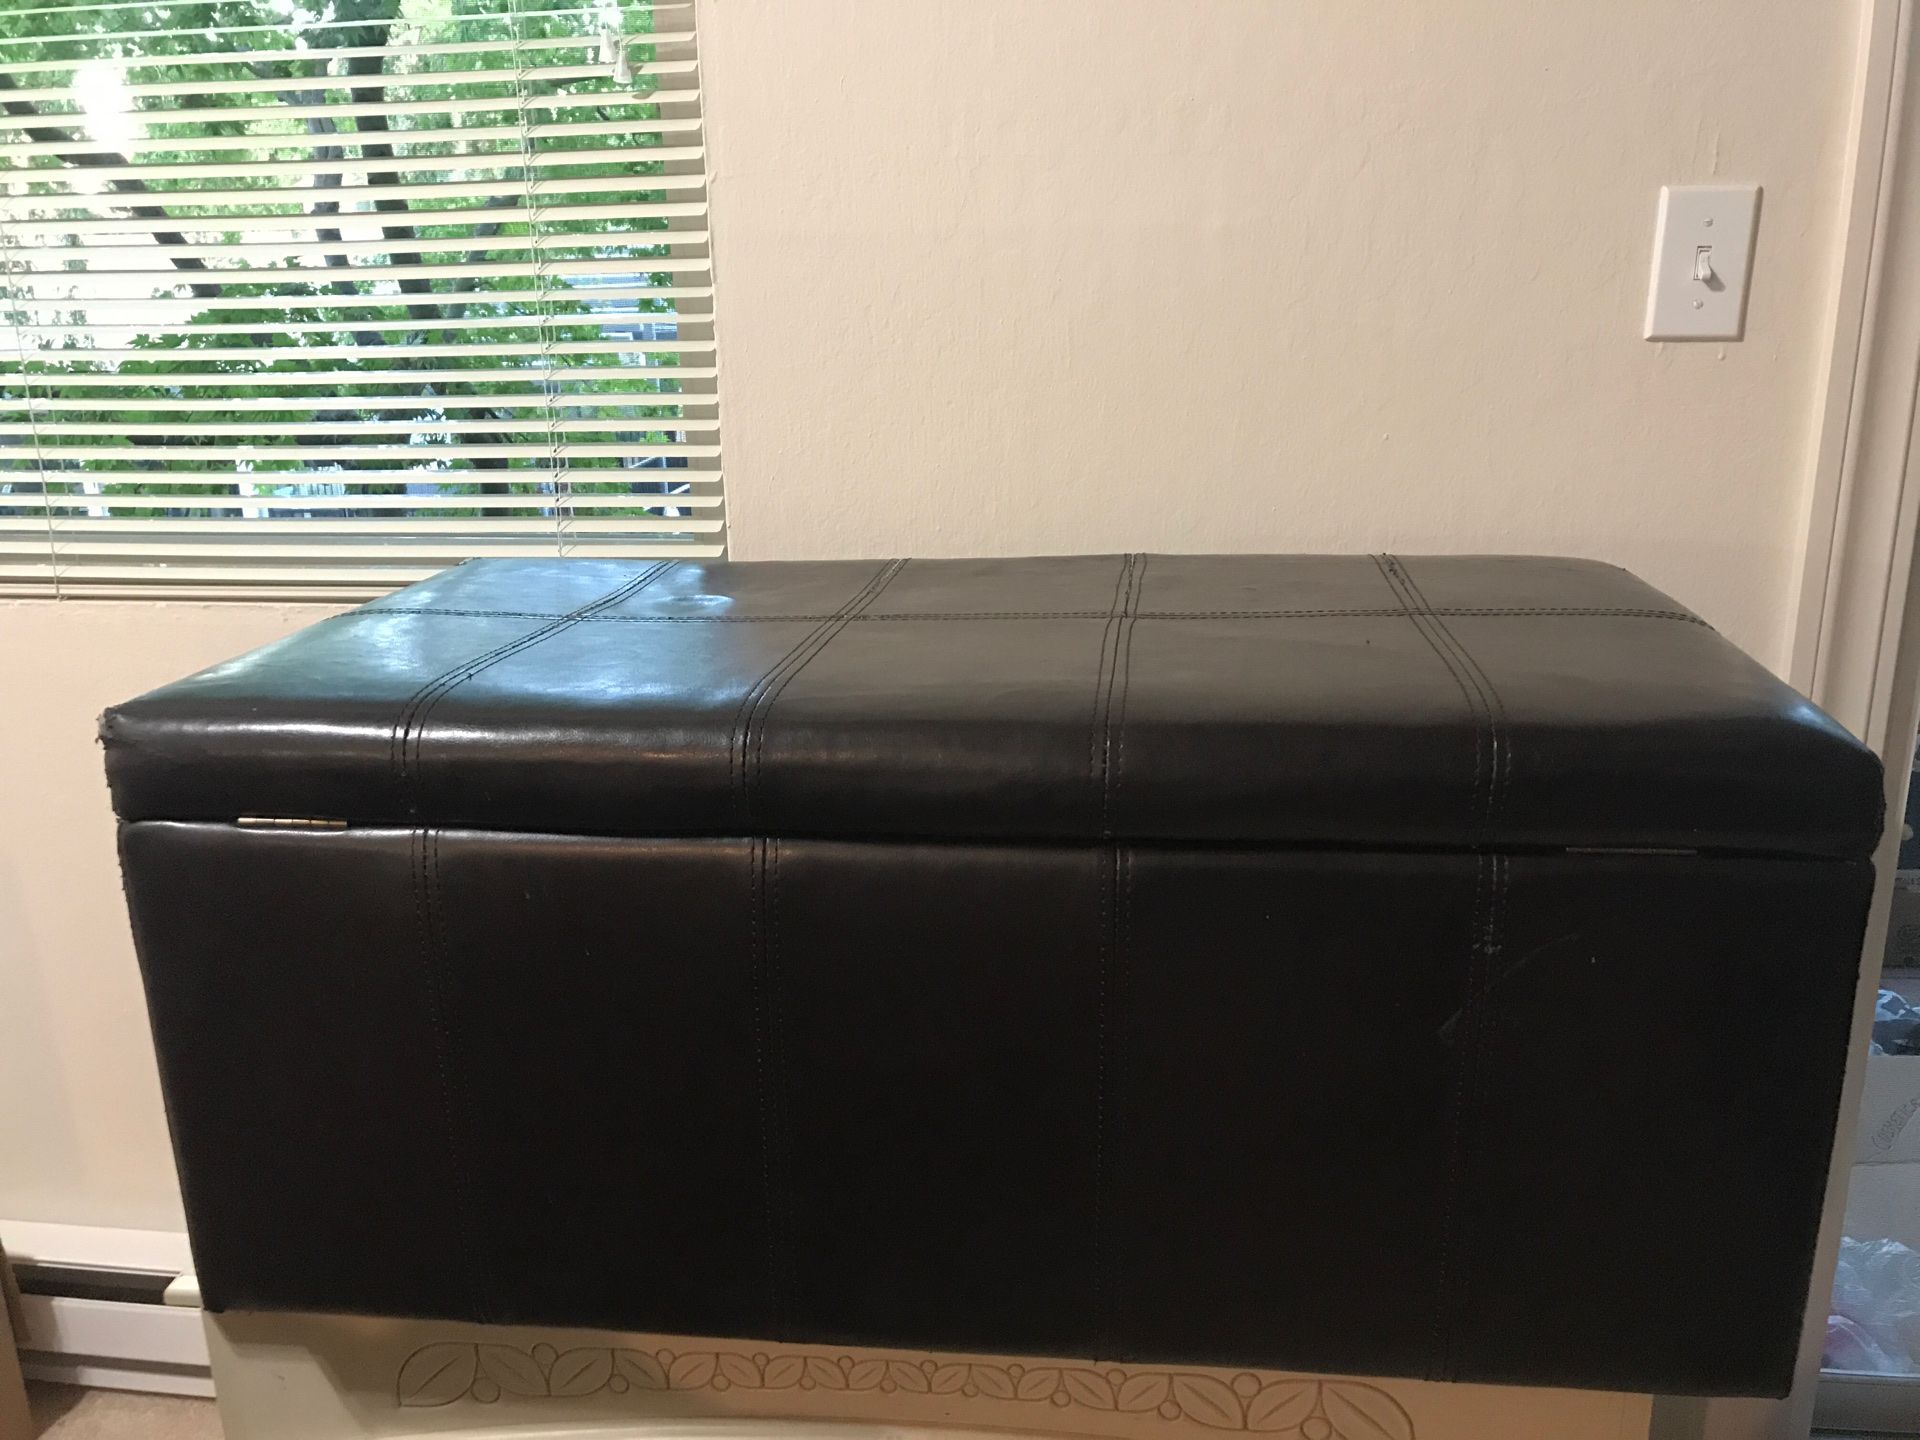 Ottoman For Free!